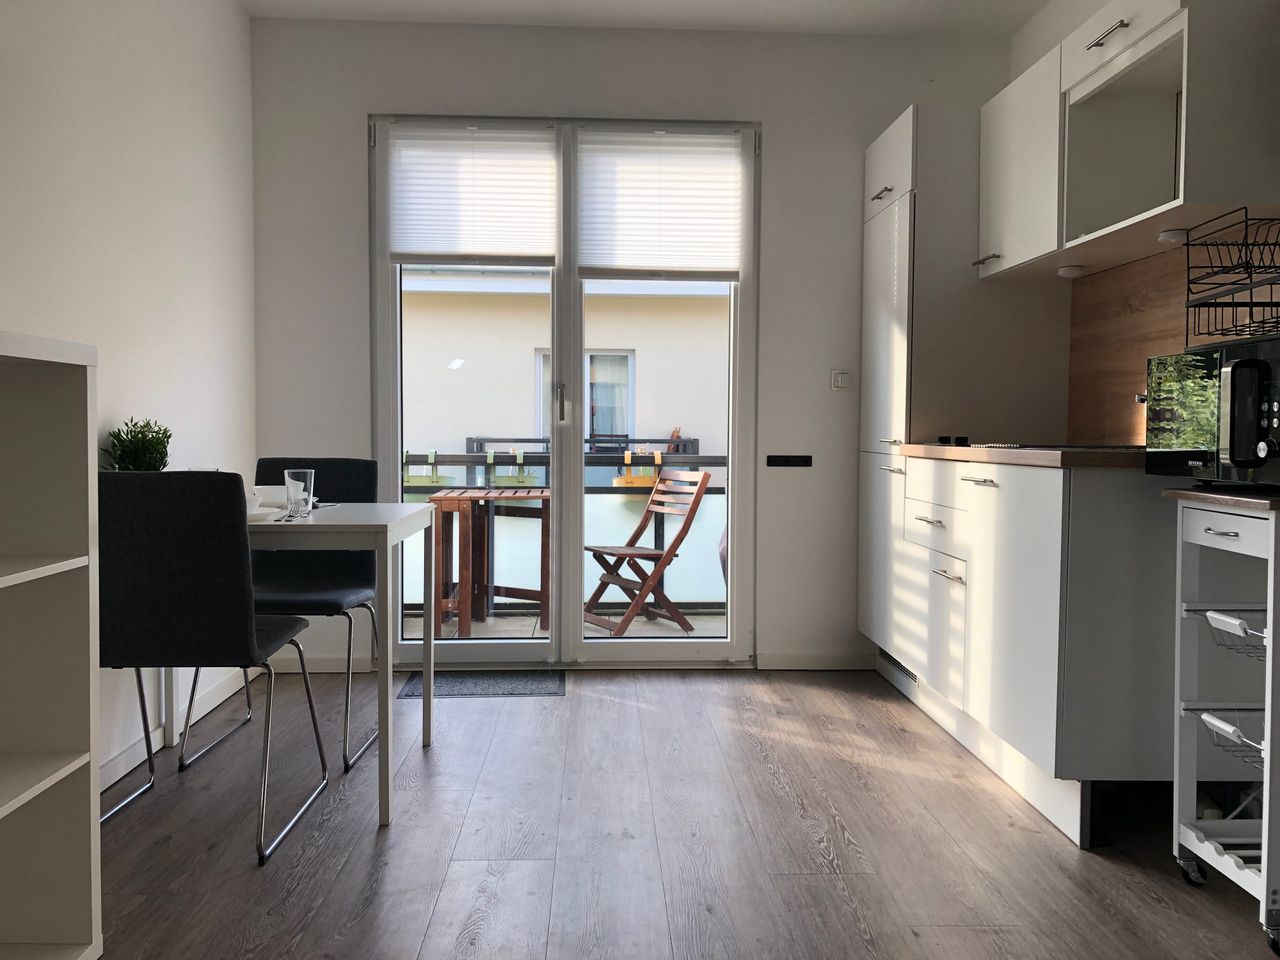 New and cozy flat in Berlin with balcony and BBQ